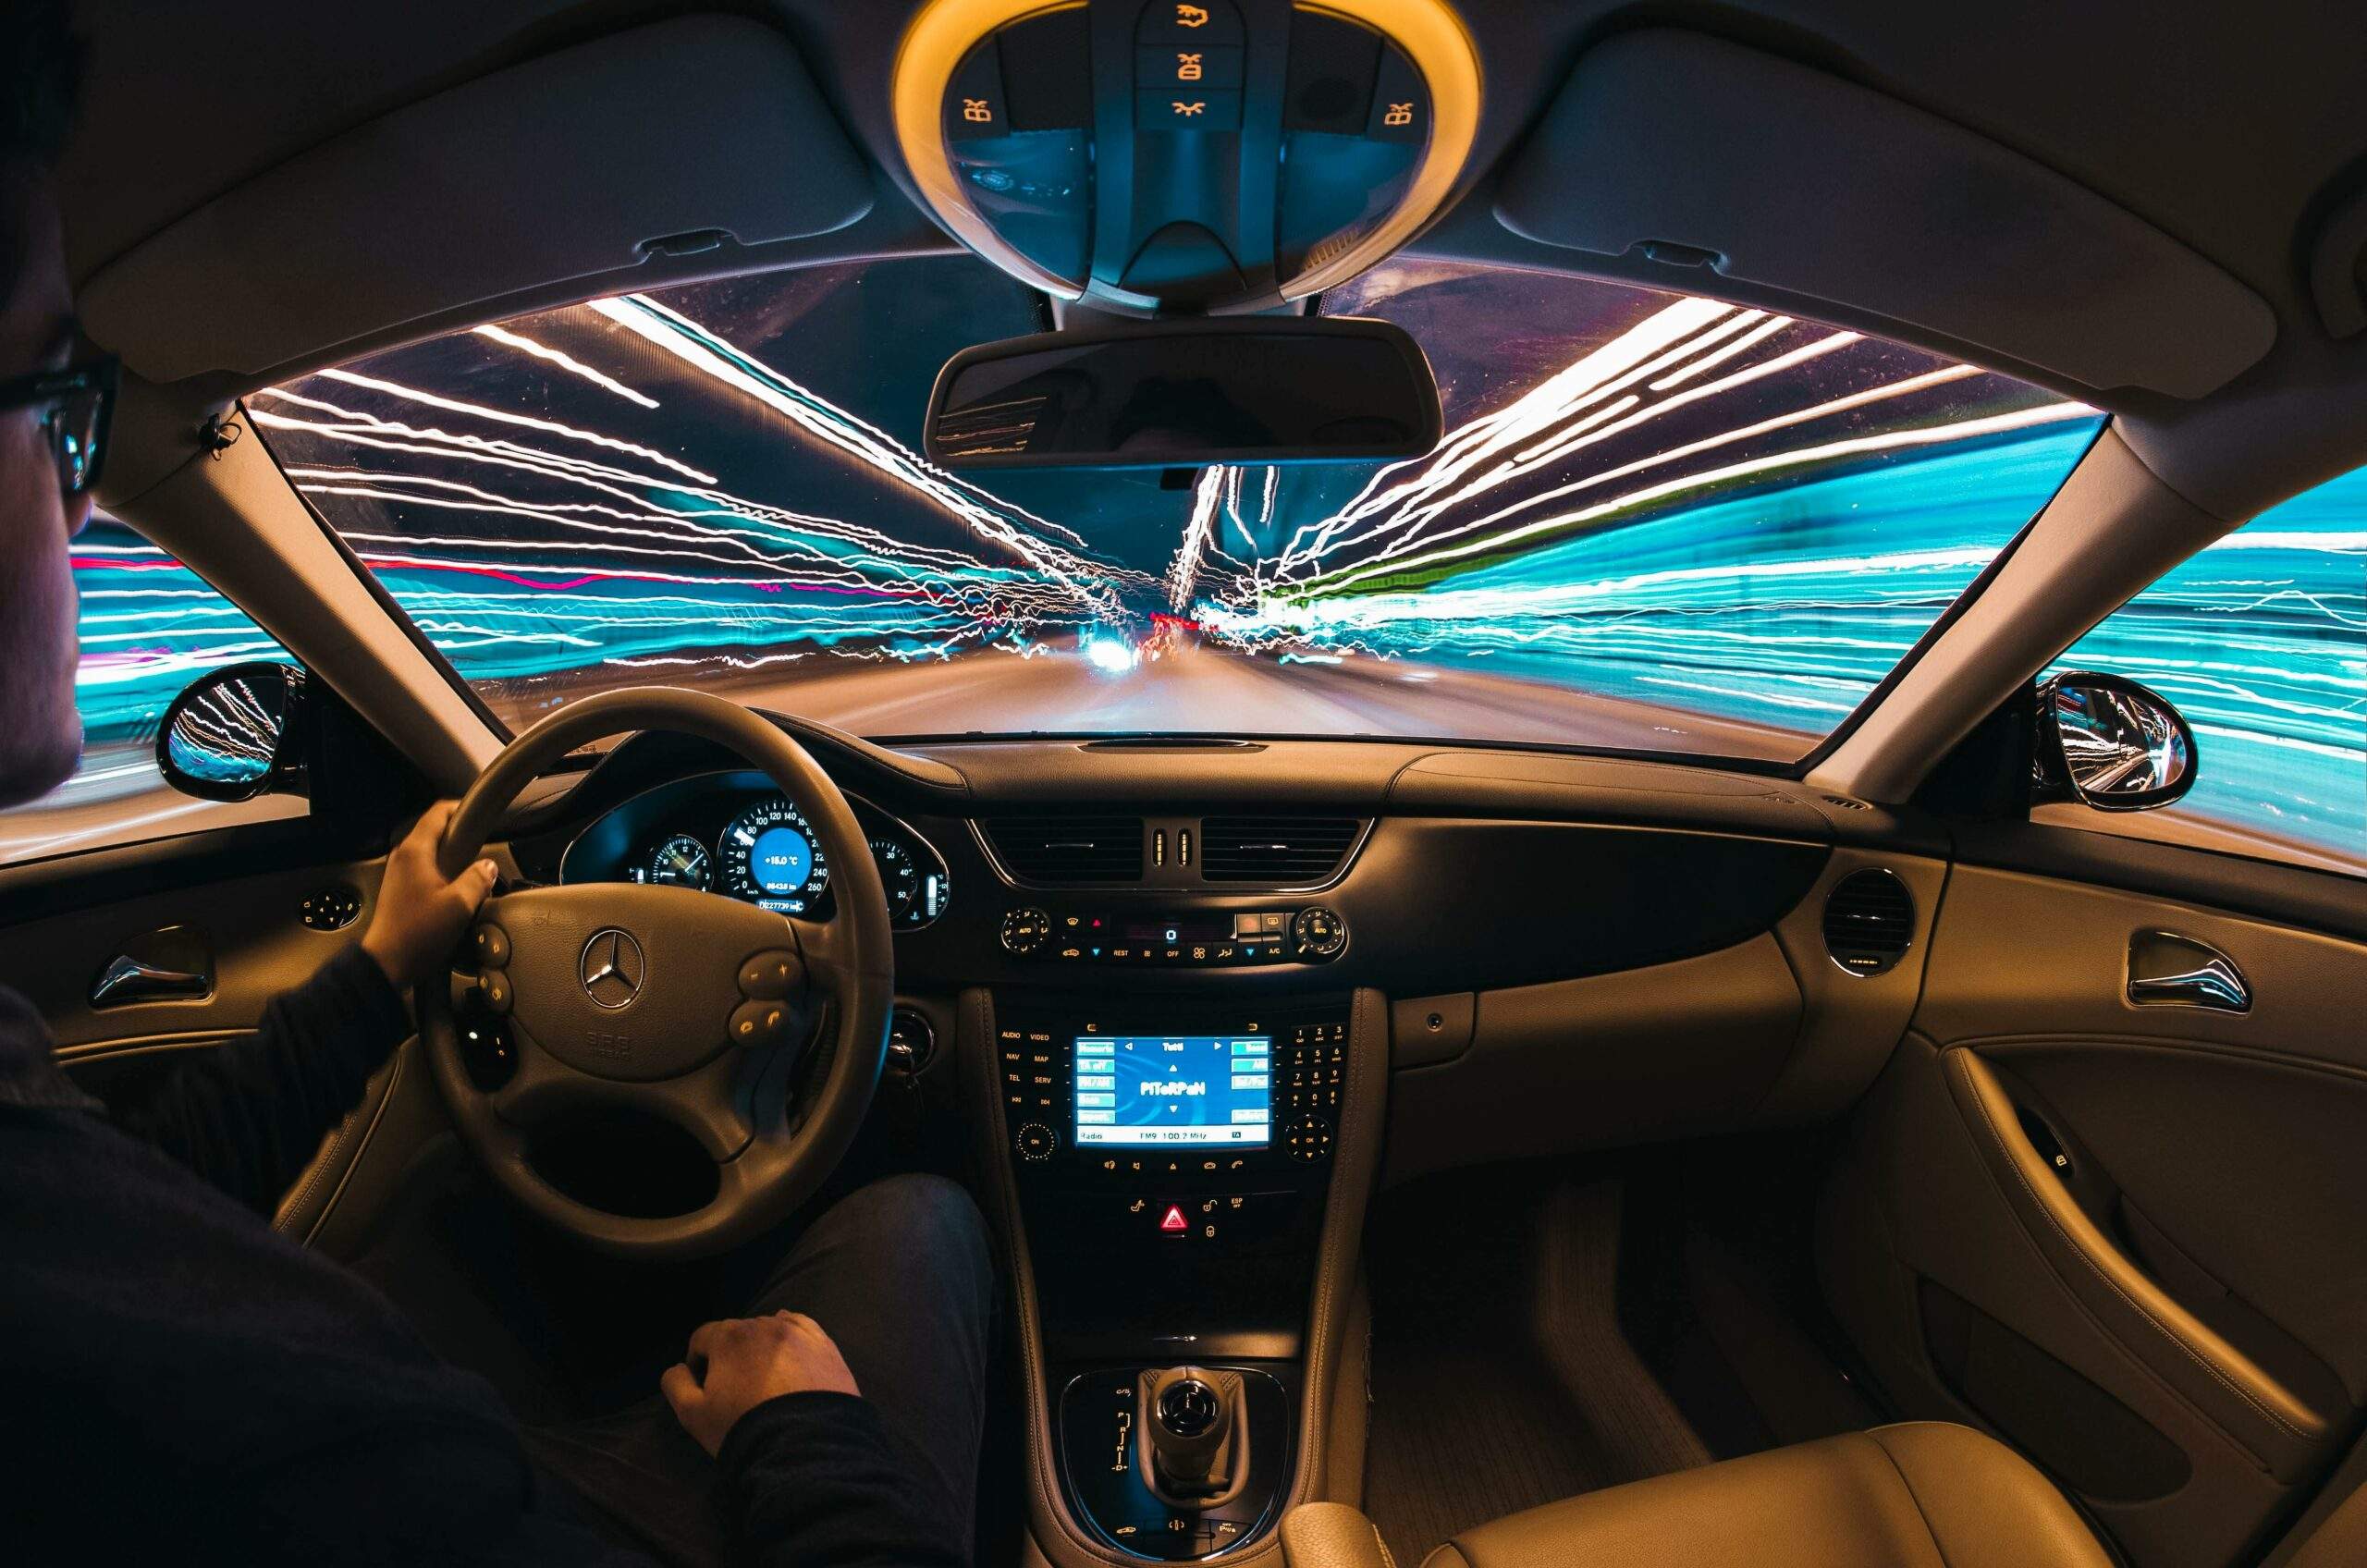 How Vehicle-to-Everything (V2X) Technology Impacts the Automotive Industry